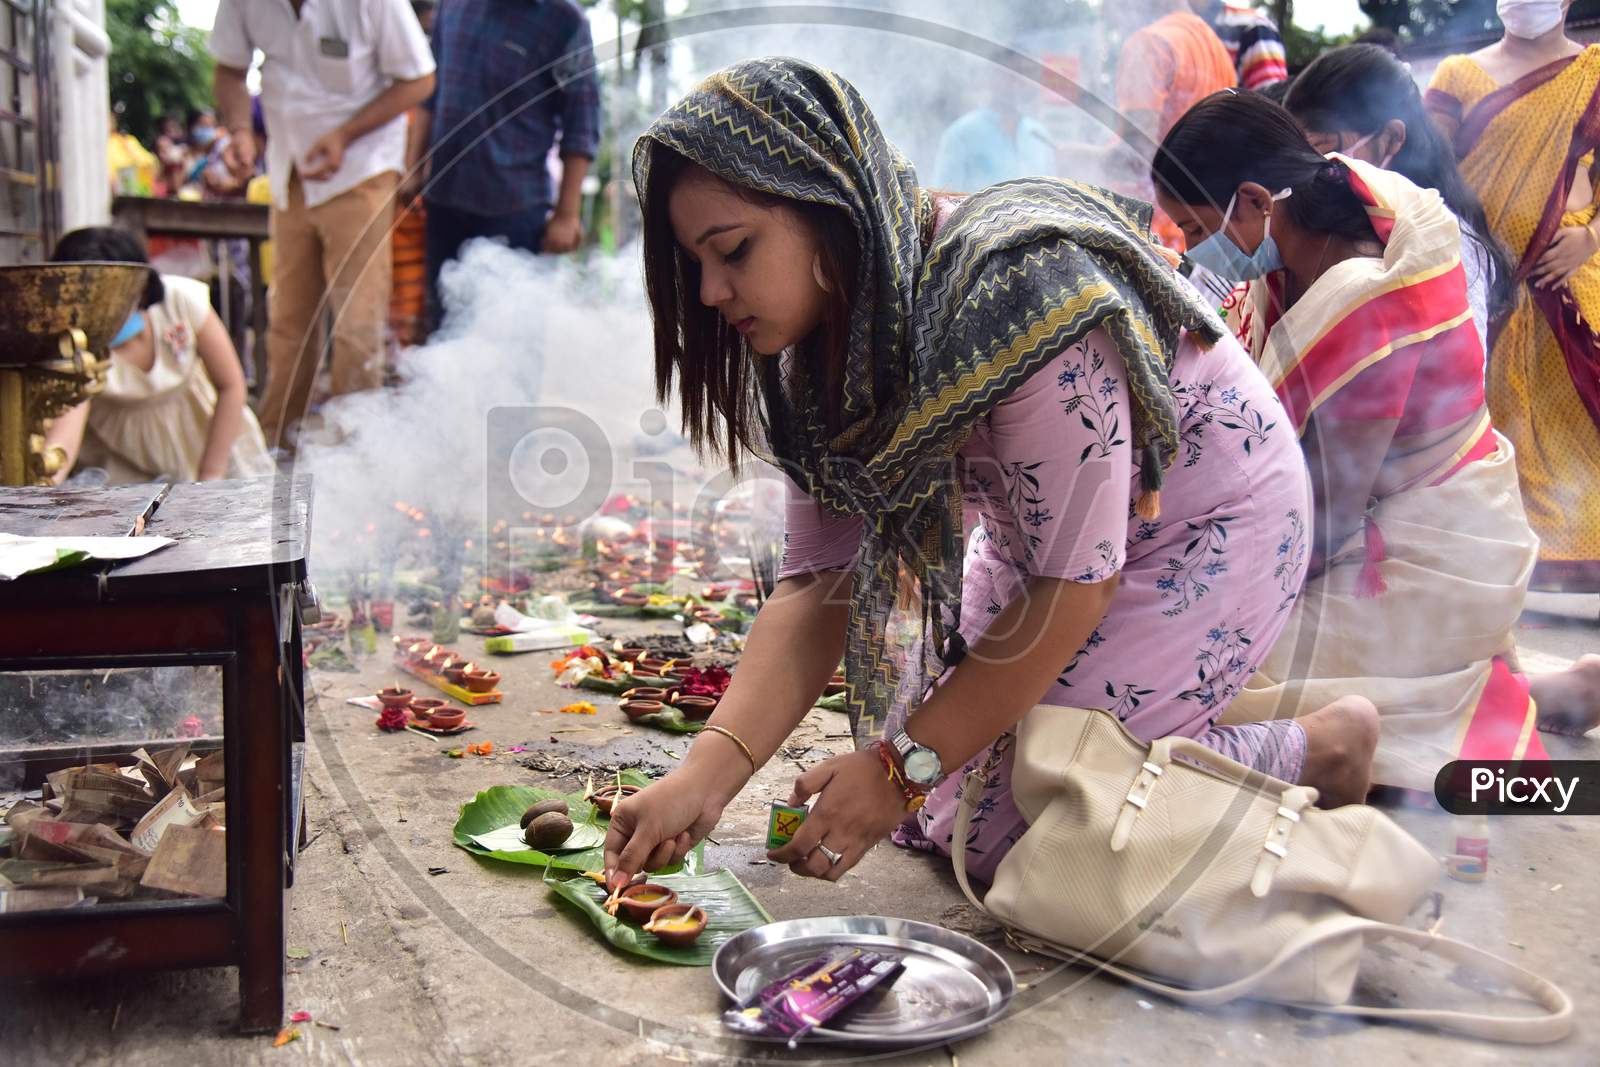 Devotees Lighting The Earthen Lamp To Offer Prayers To Lord Ganesha On The Occasion Of  Ganesh Chaturthi Festival In Nagaon District Of Assam On August 22,2020.